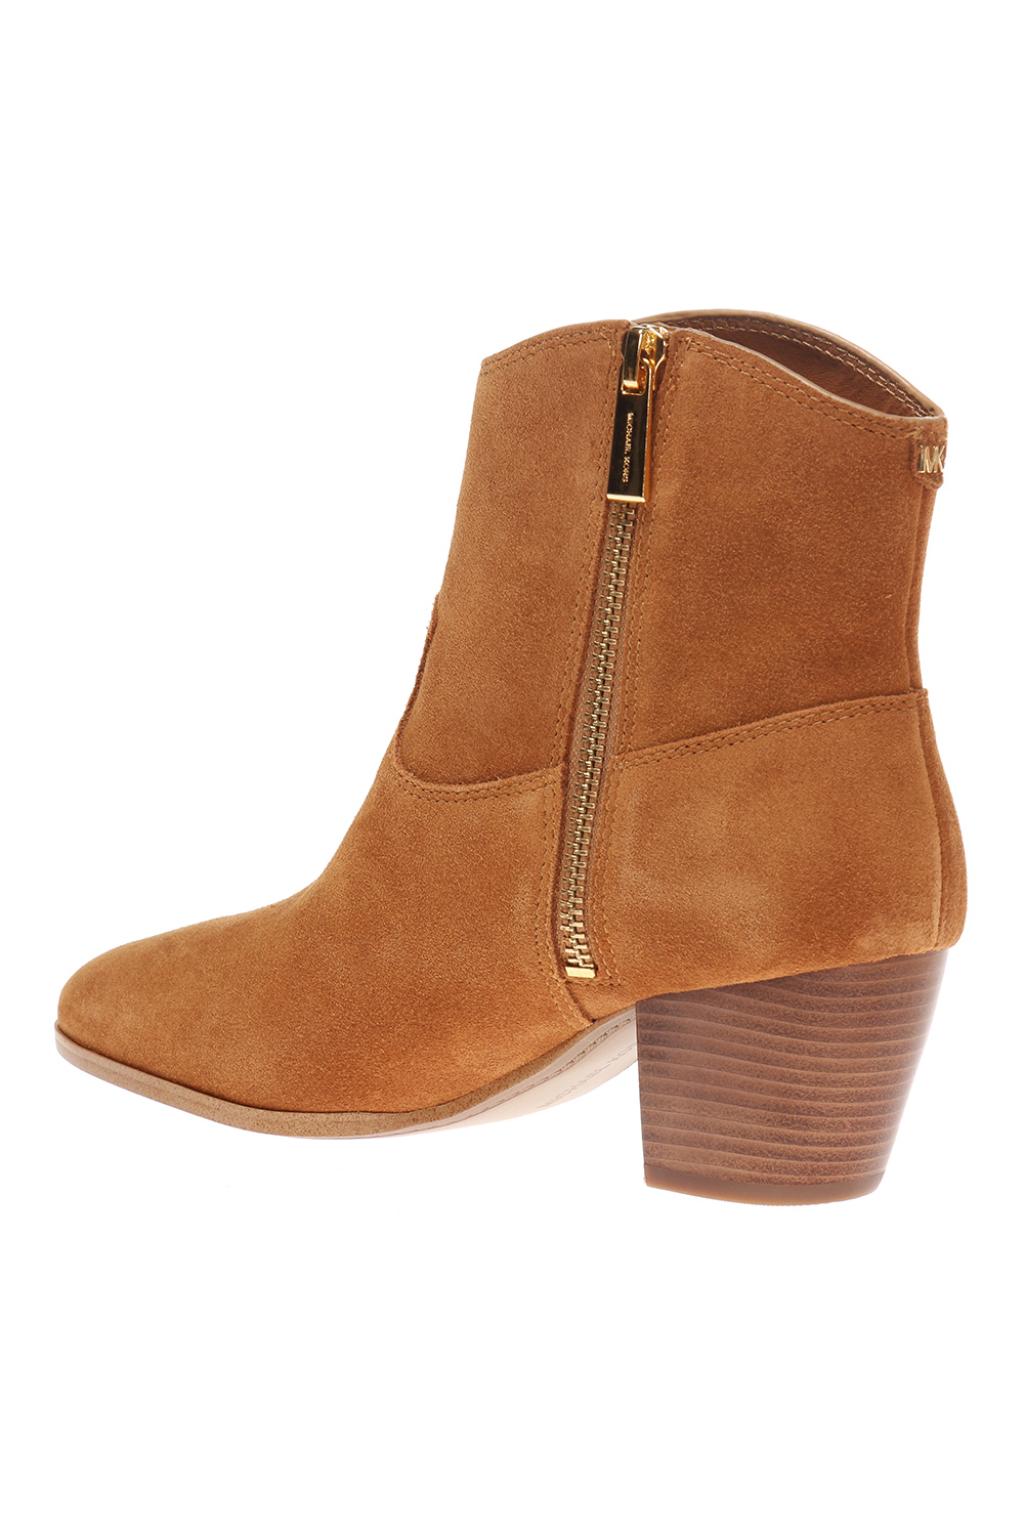 Avery' heeled ankle boots Michael 